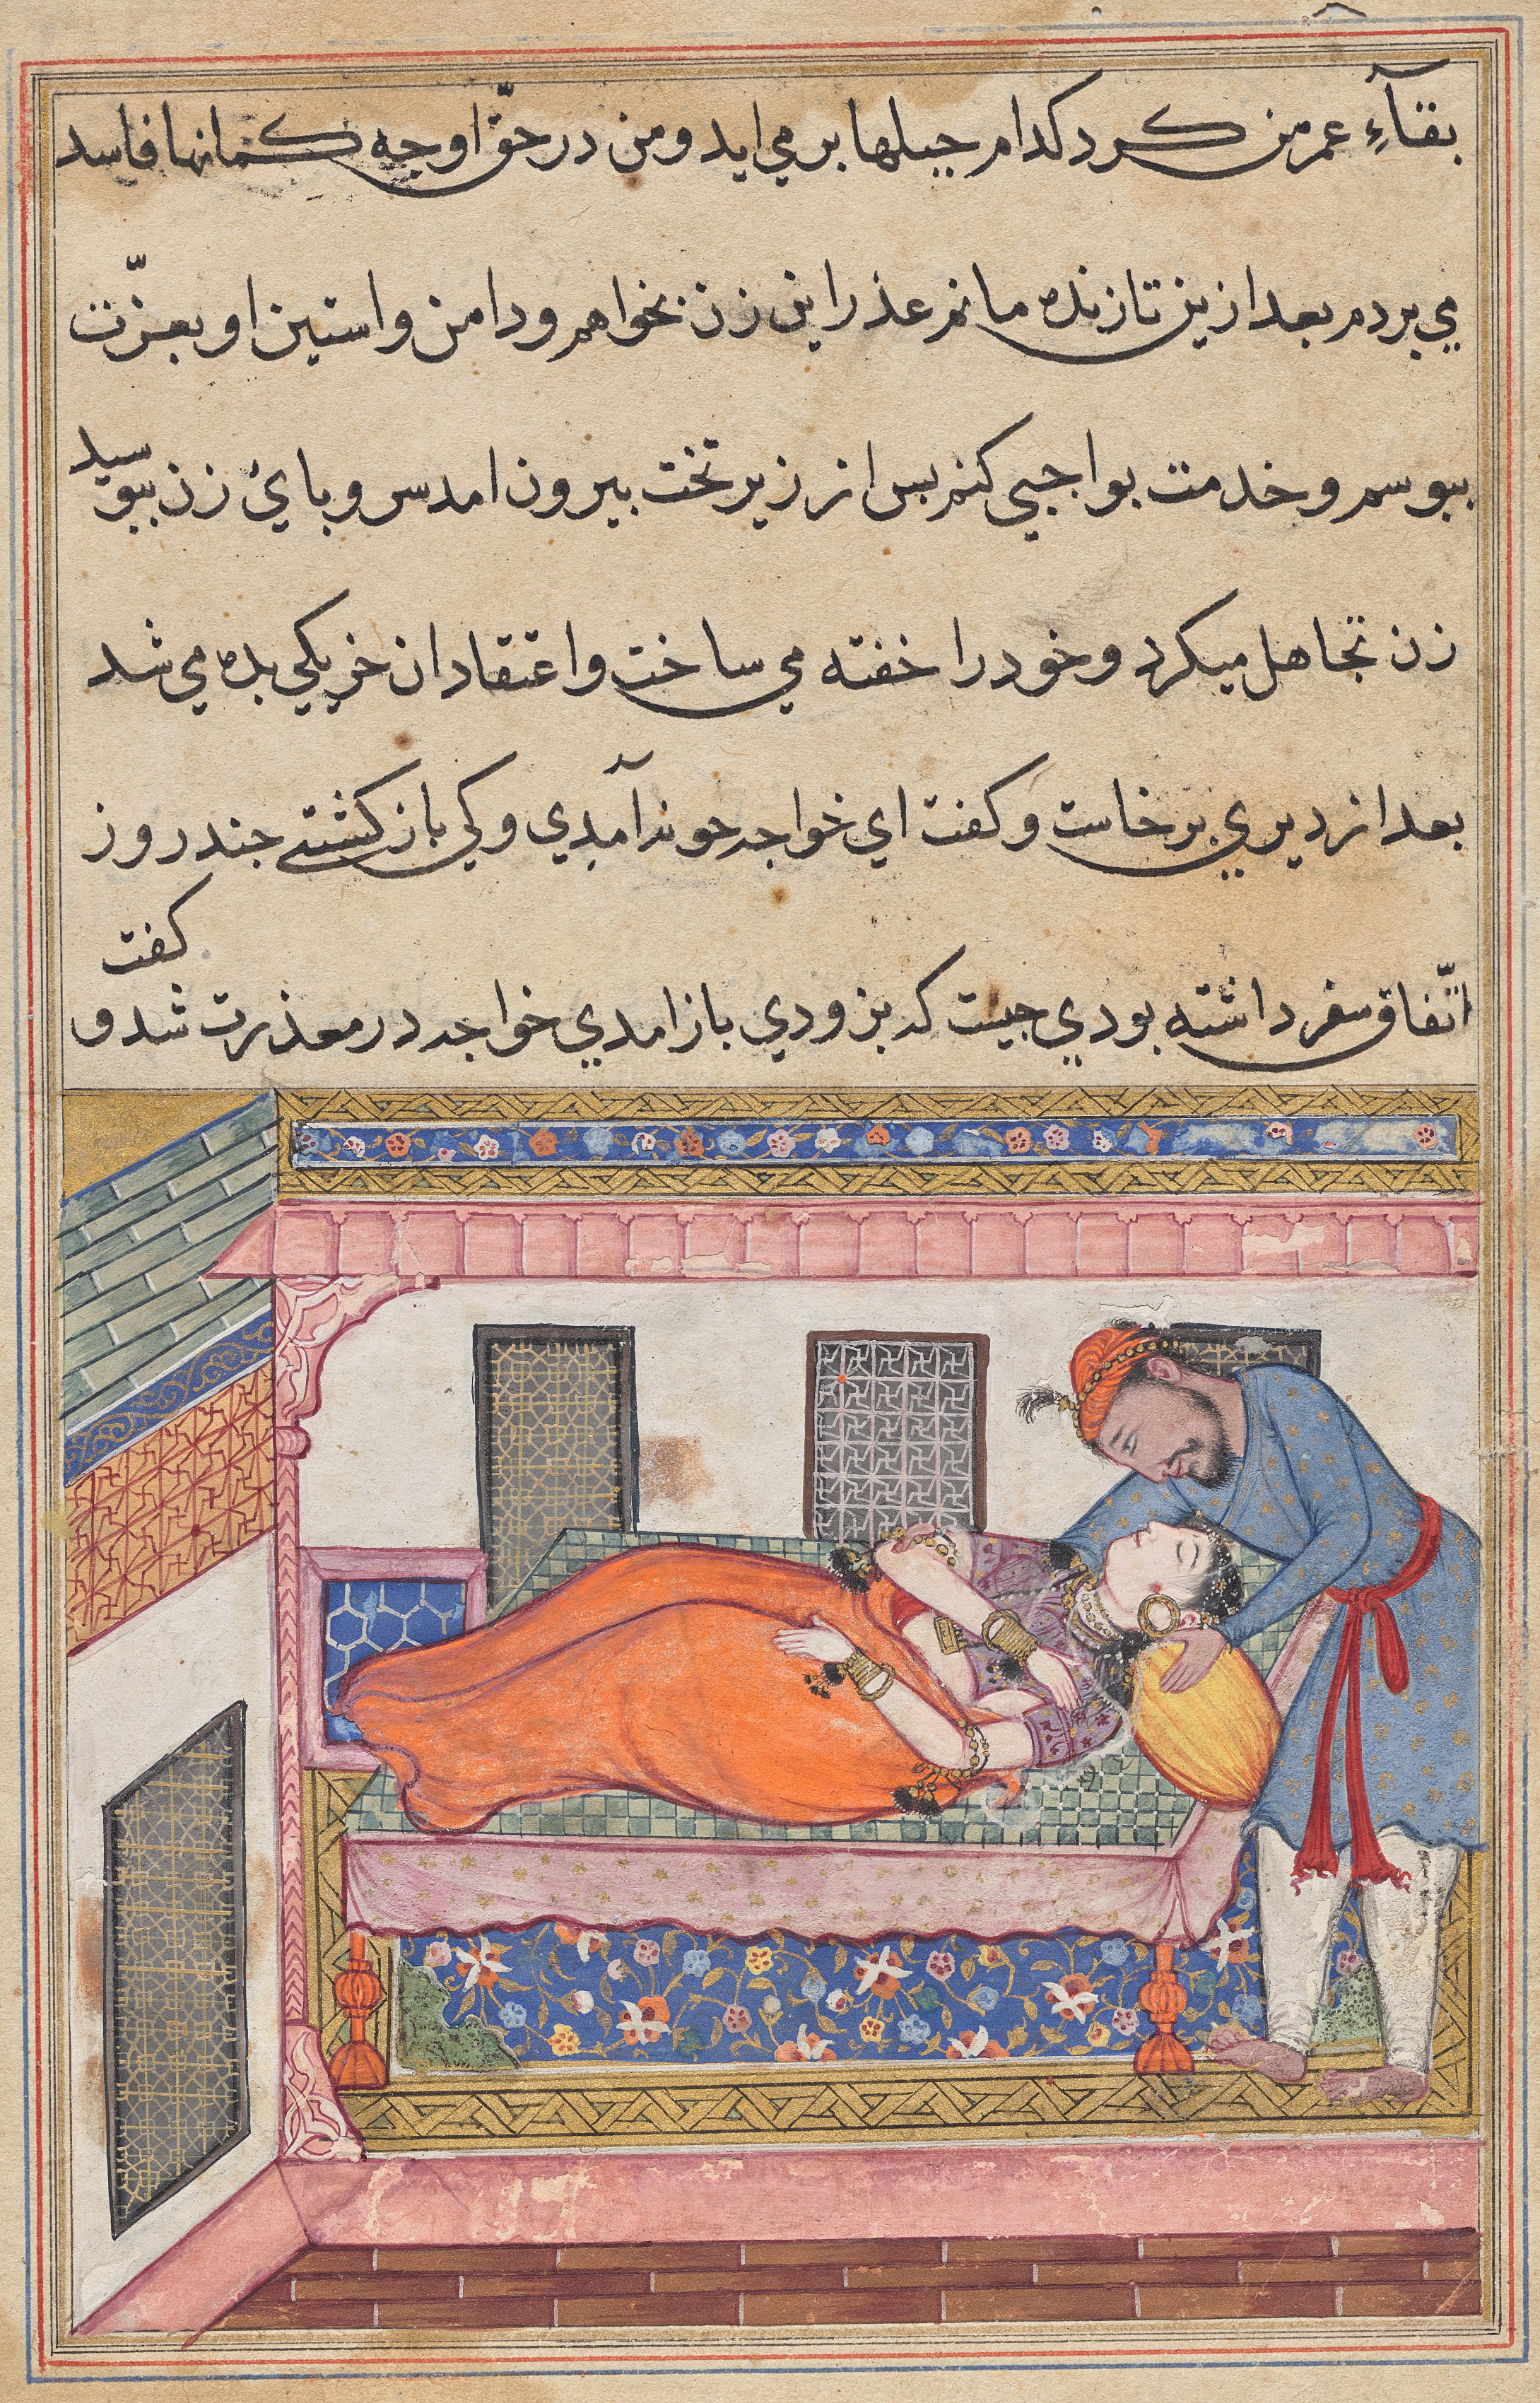 Shahr-Arai’s husband bends to kiss his wife who feigns sleep, from a Tuti-nama (Tales of a Parrot): Fortieth Night